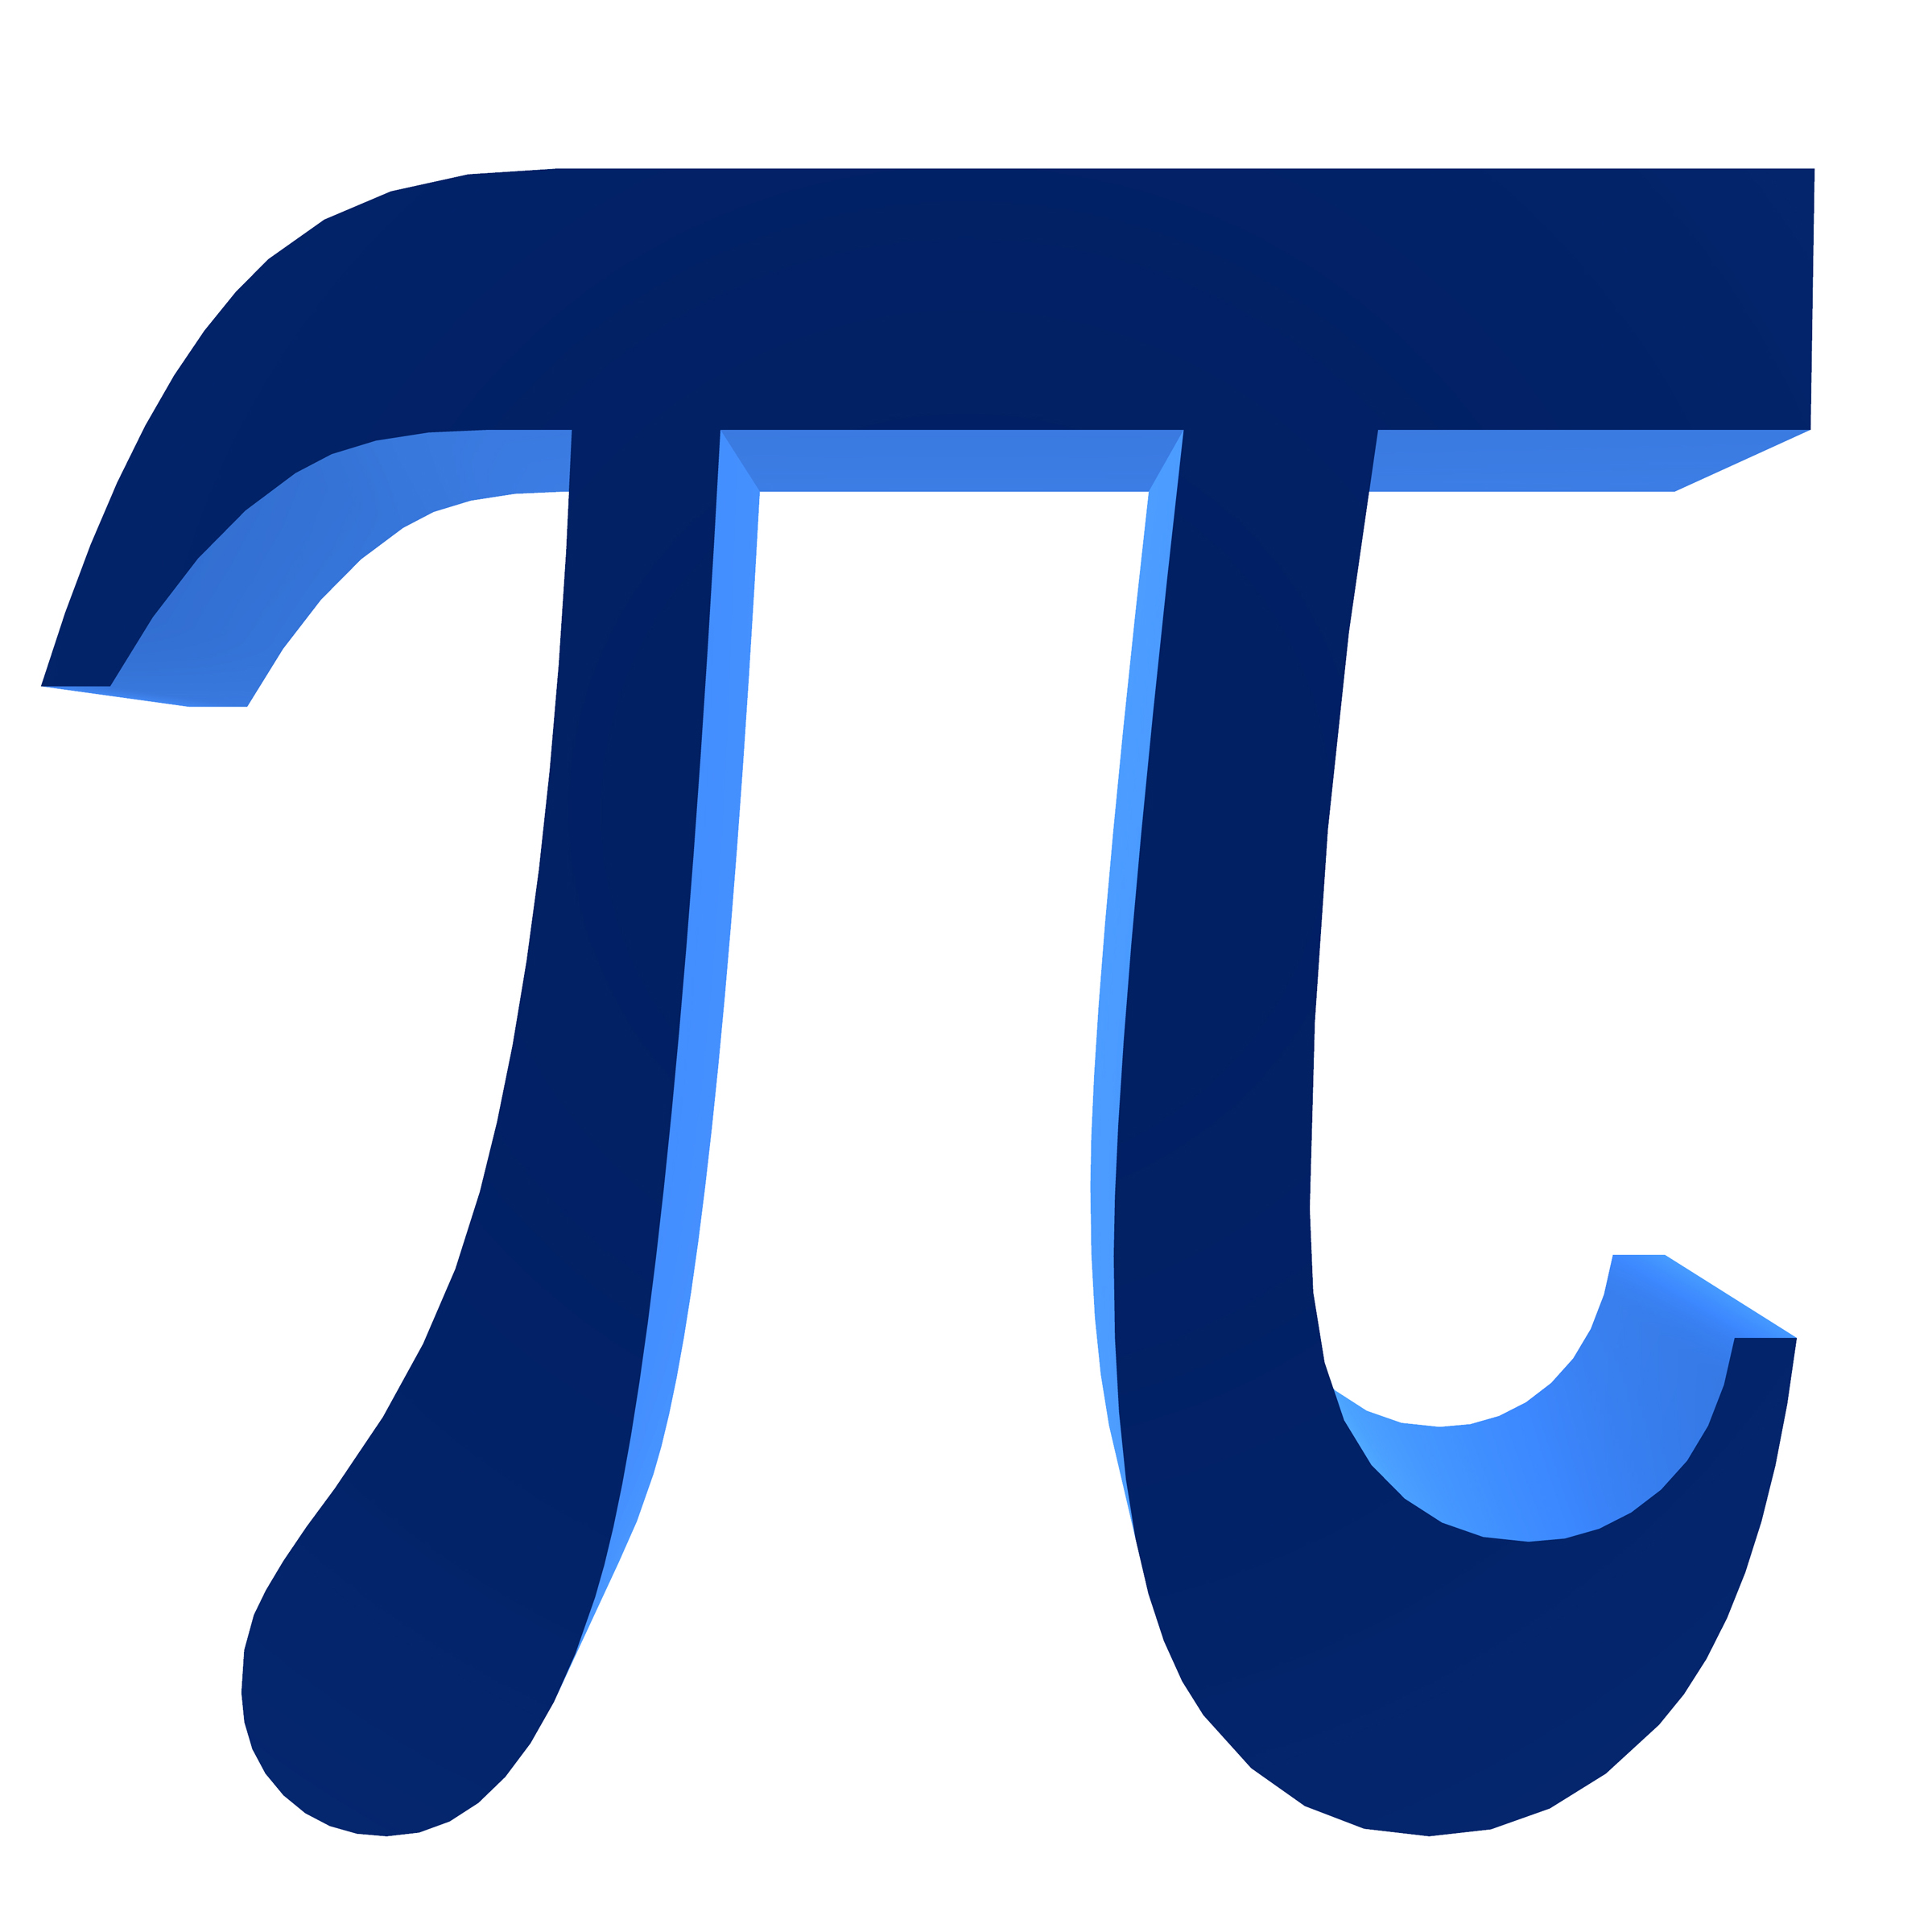 Easy as Pi: Memorizing digits of Pi for recreation and extra